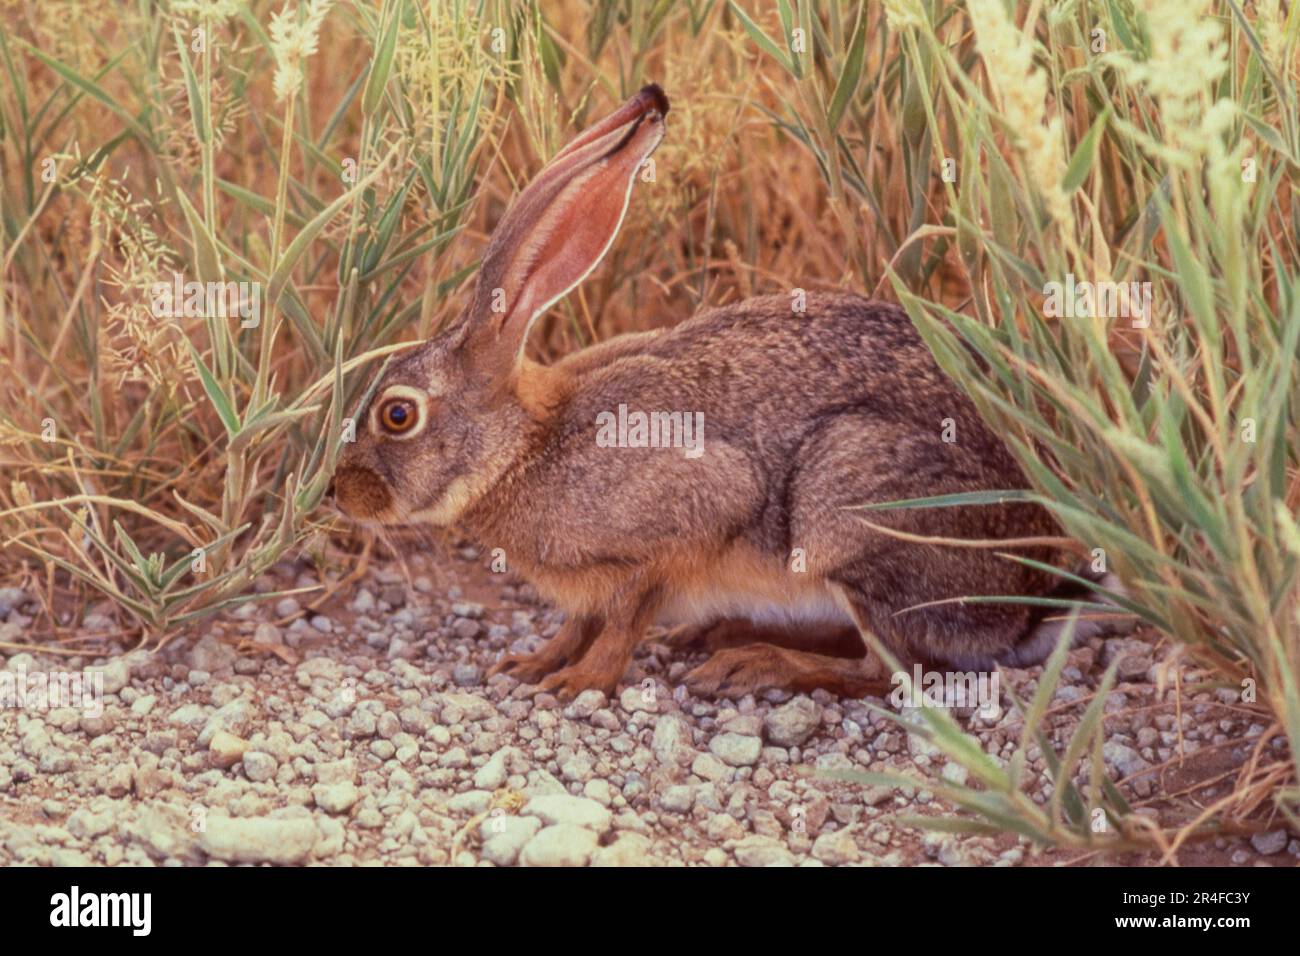 The Cape hare (Lepus capensis), also called the brown hare and the desert hare, is a hare native to Africa and Arabia extending into India. Stock Photo